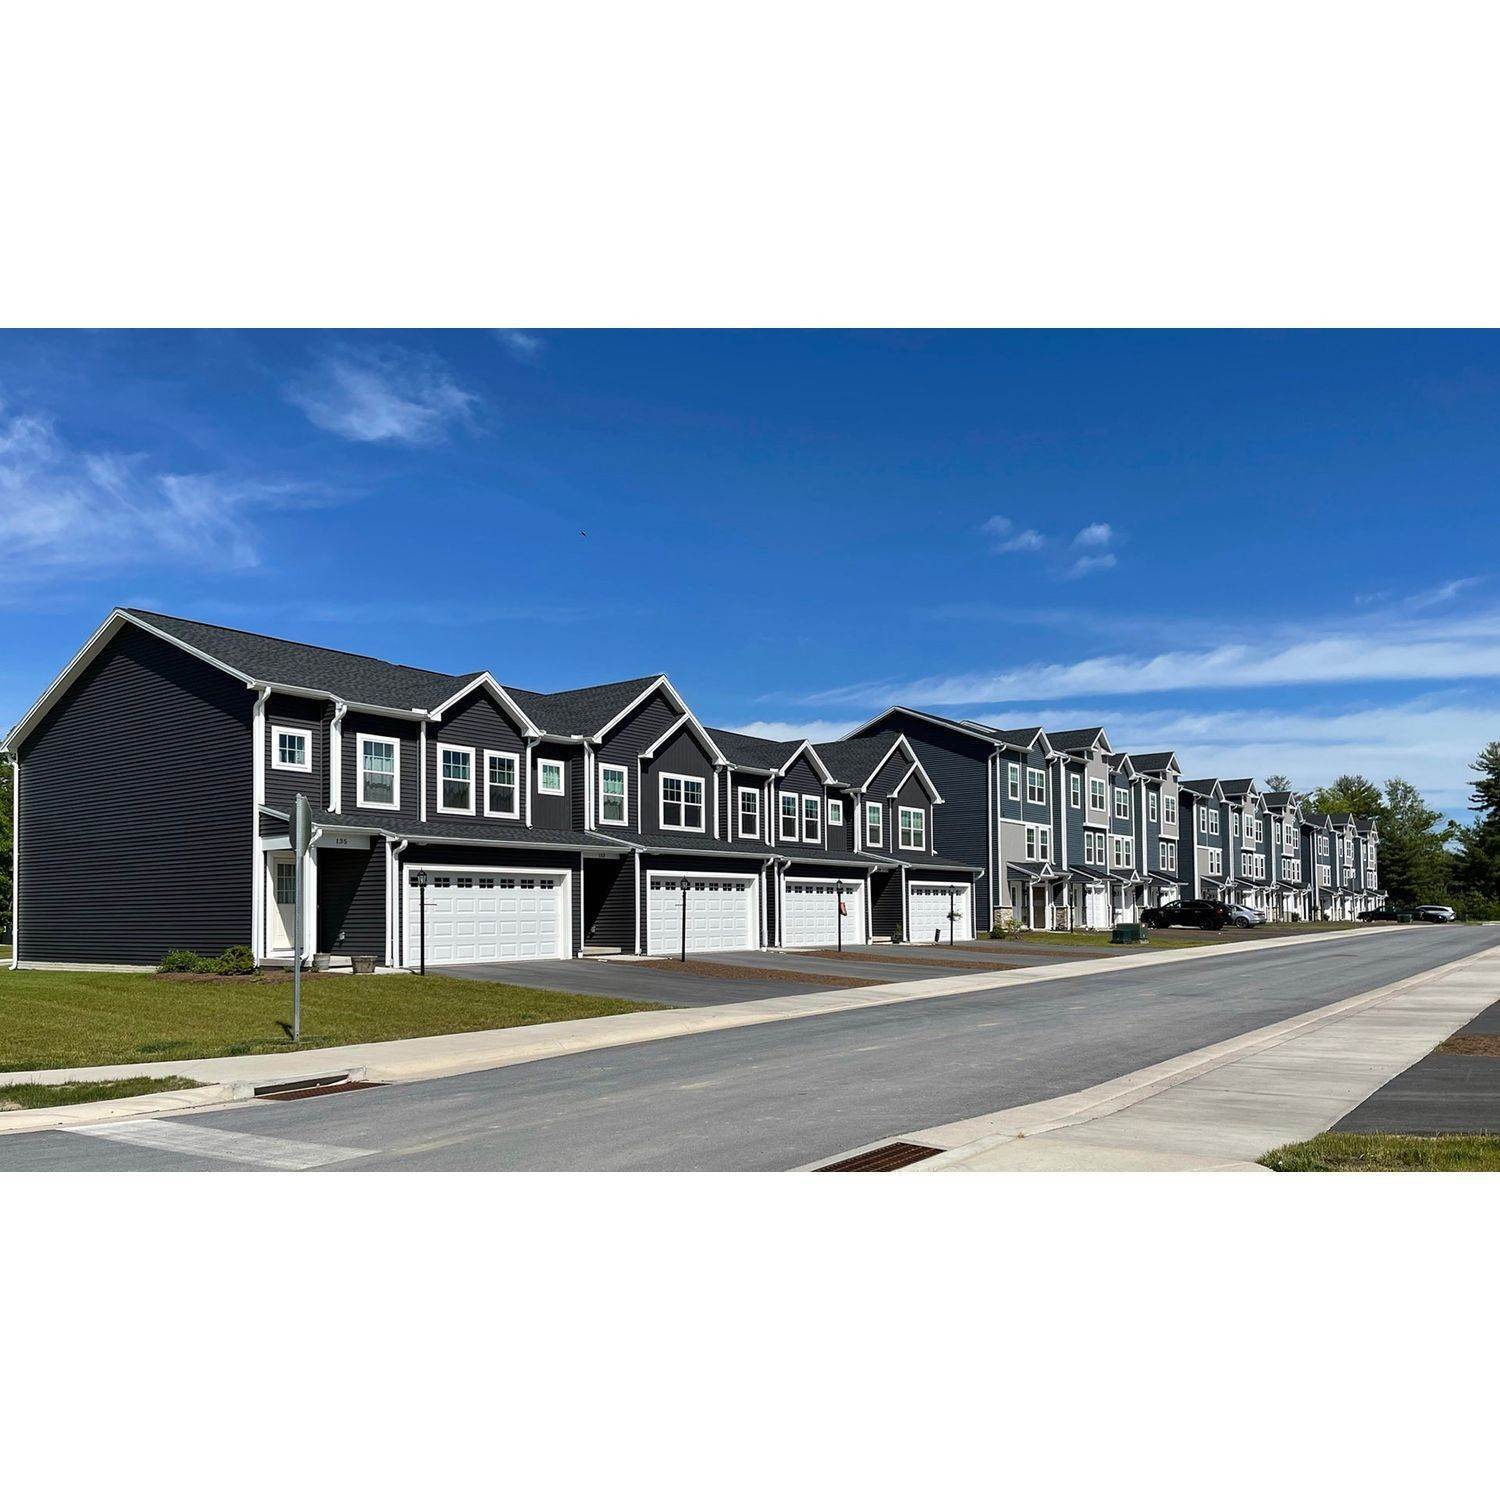 4. Grays Pointe - Townhomes building at 115 Amicus Drive, Port Matilda, PA 16870